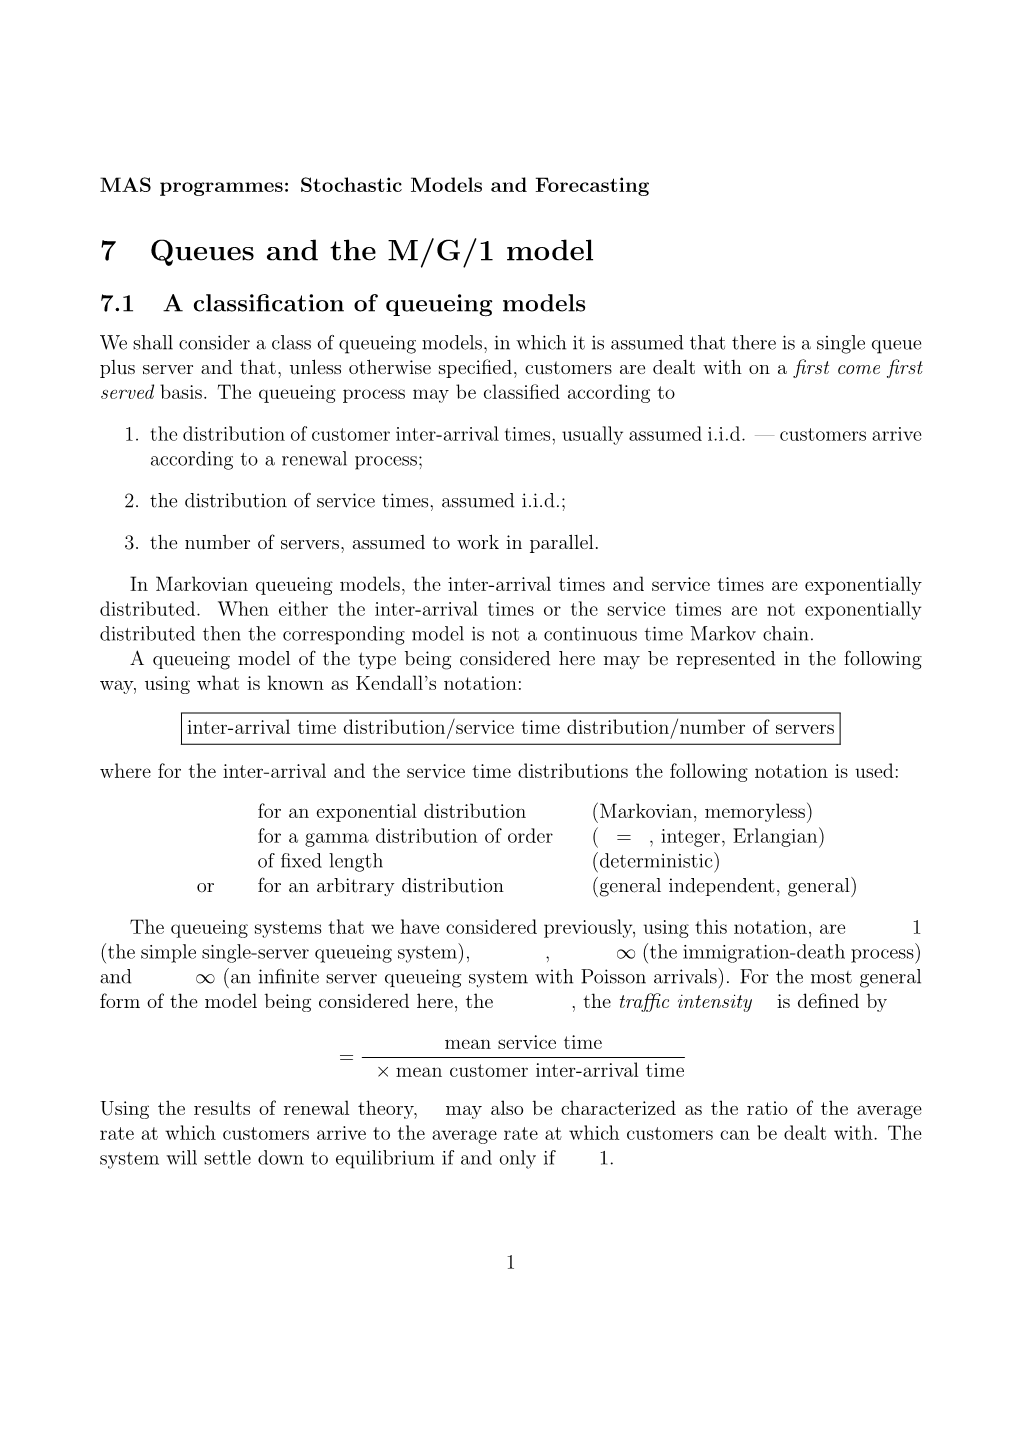 7 Queues and the M/G/1 Model